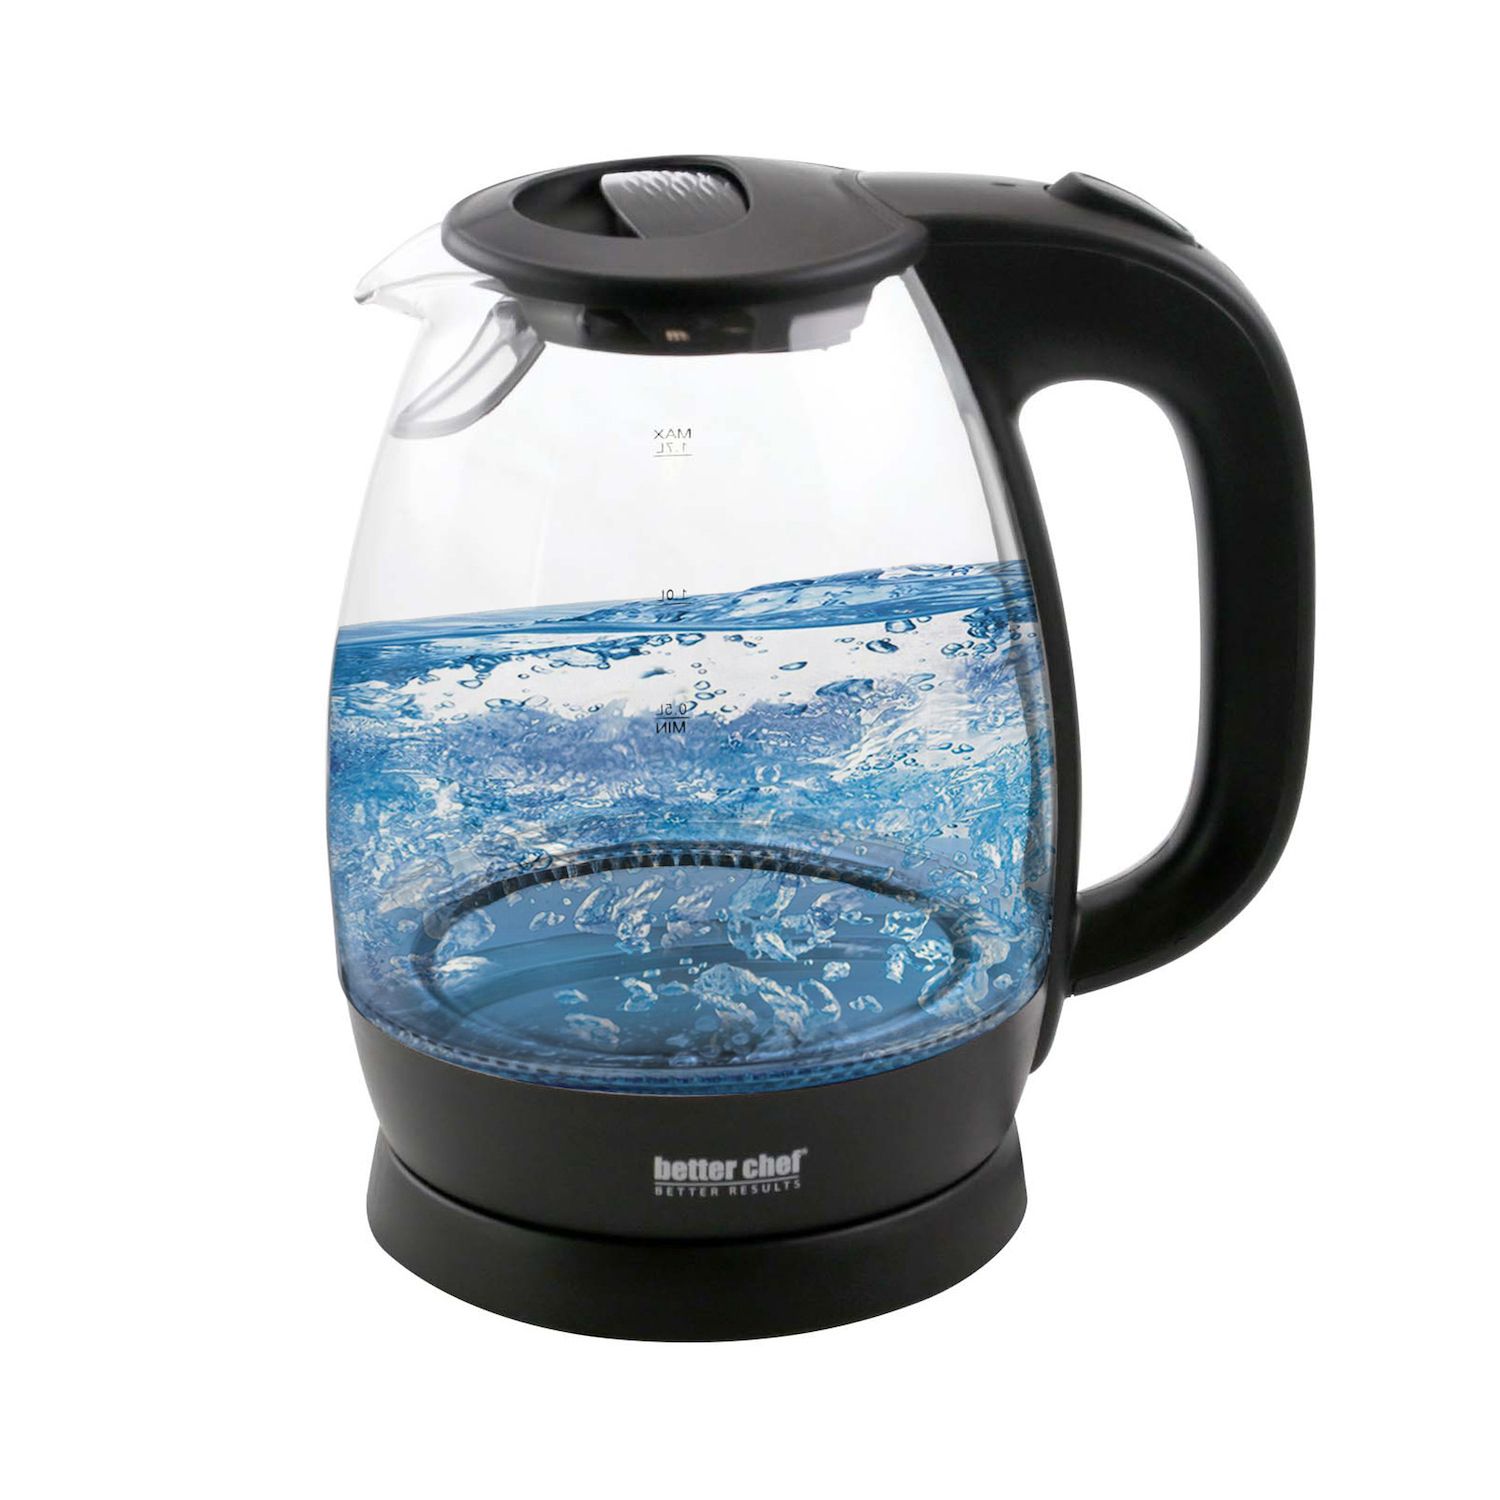 Brentwood Glass 1.7 Liter Electric Kettle with Tea Infuser in